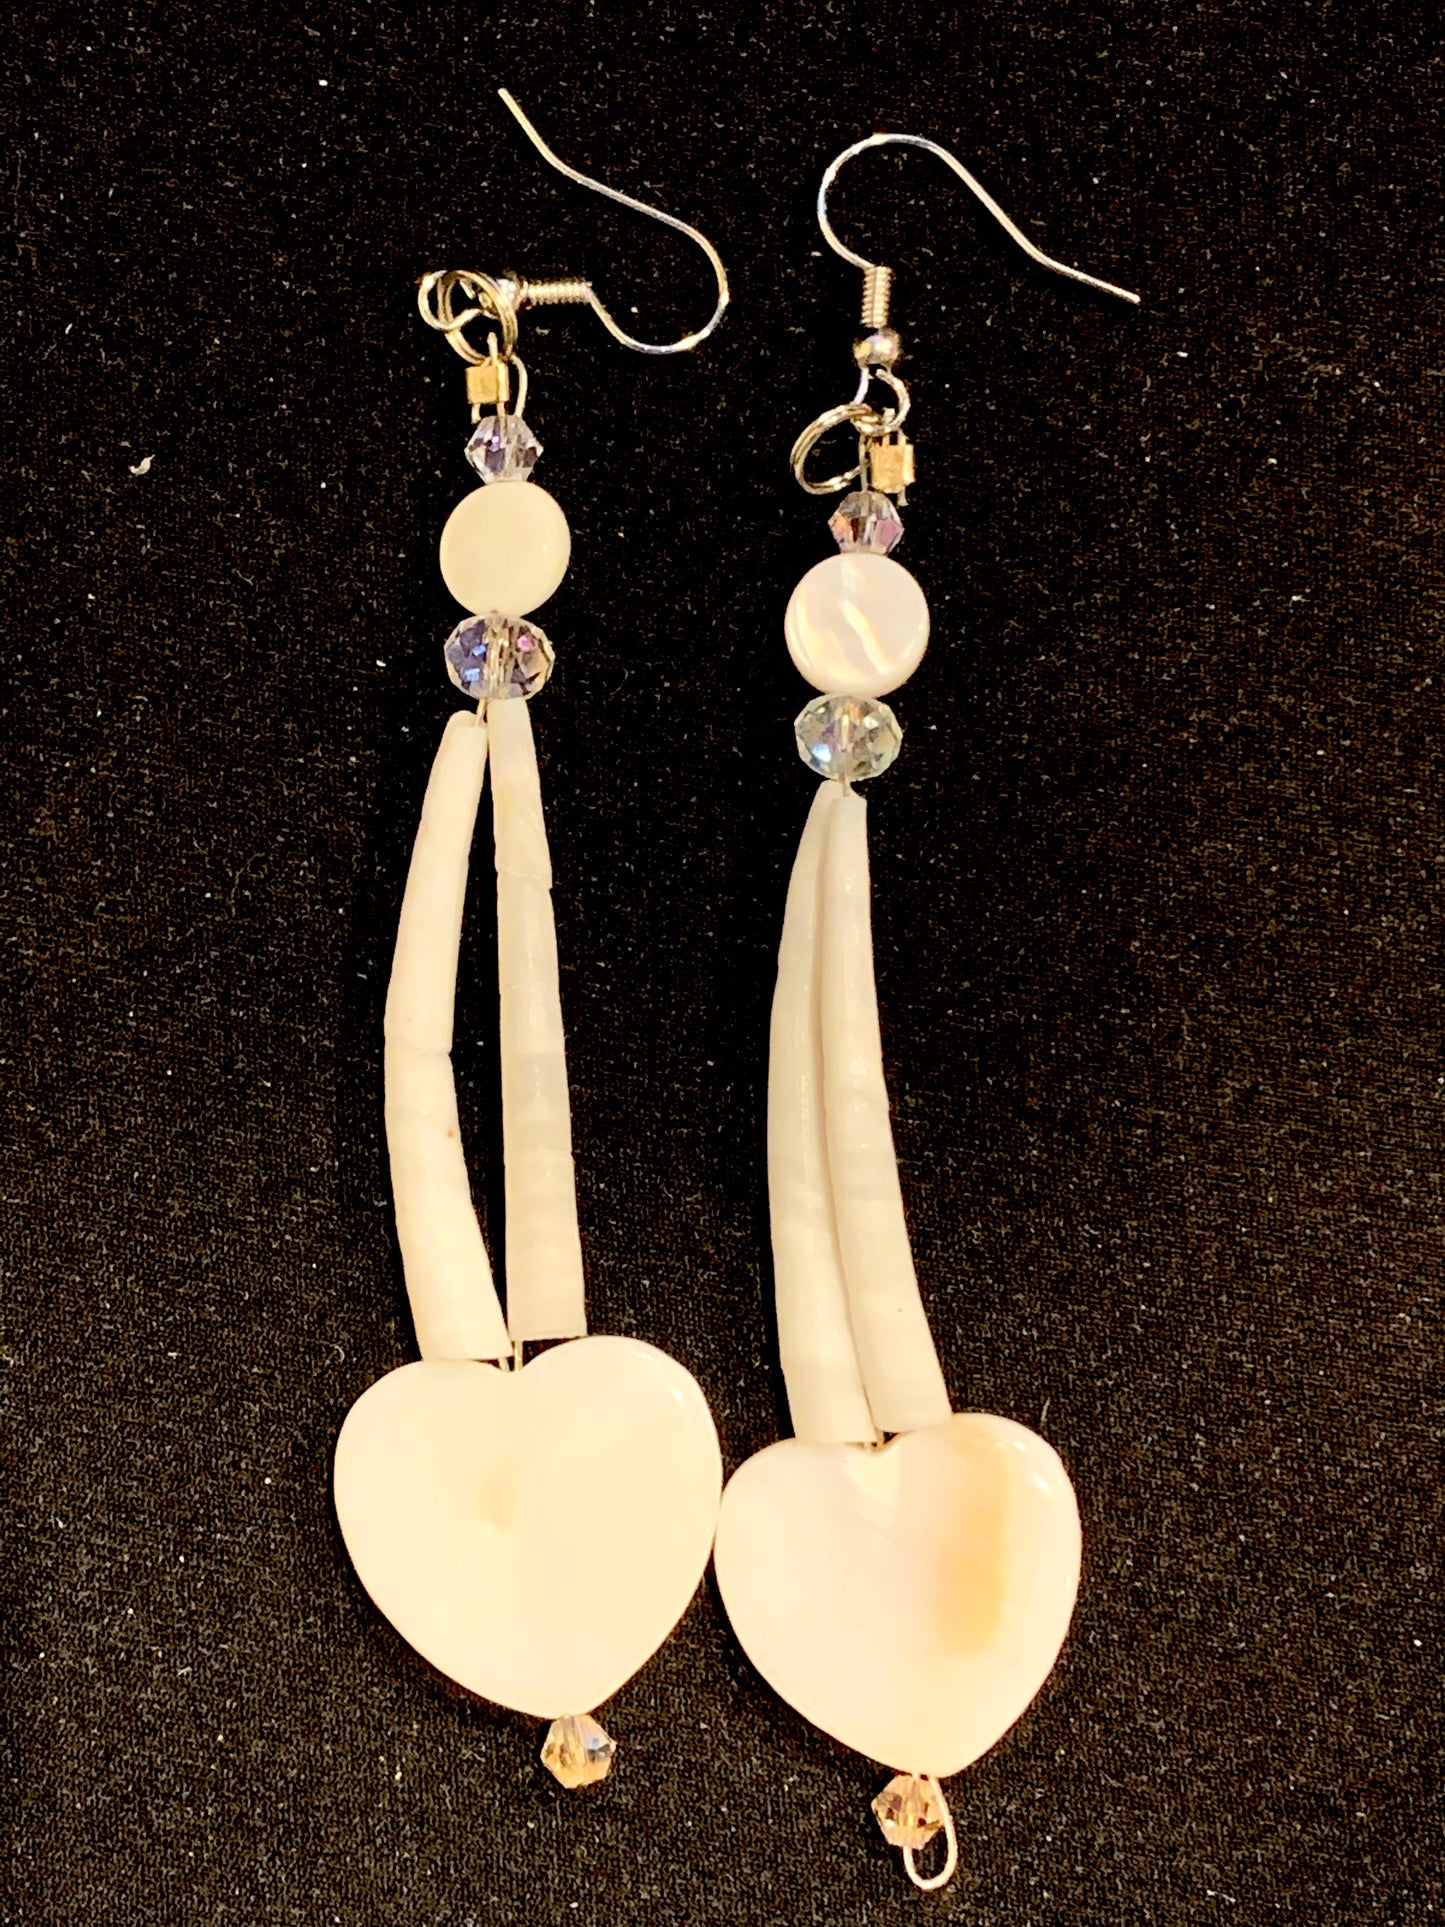 Amaris Makes Good - Two Tiered Dentalium Earrings with Hearts